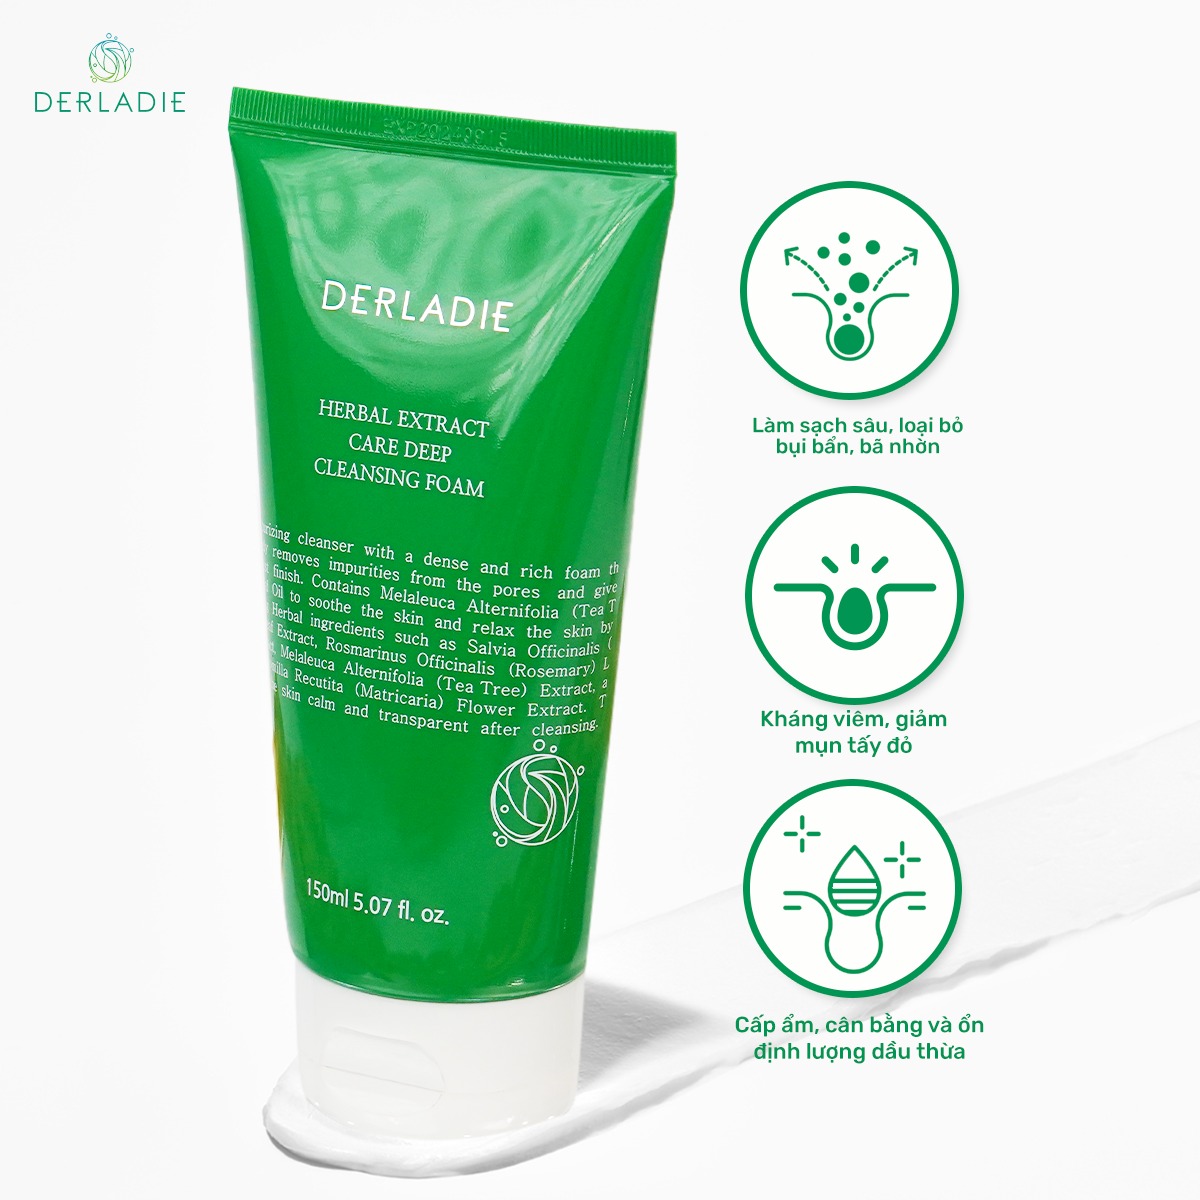 Herbal Extract Care Deep Cleansing Foam1